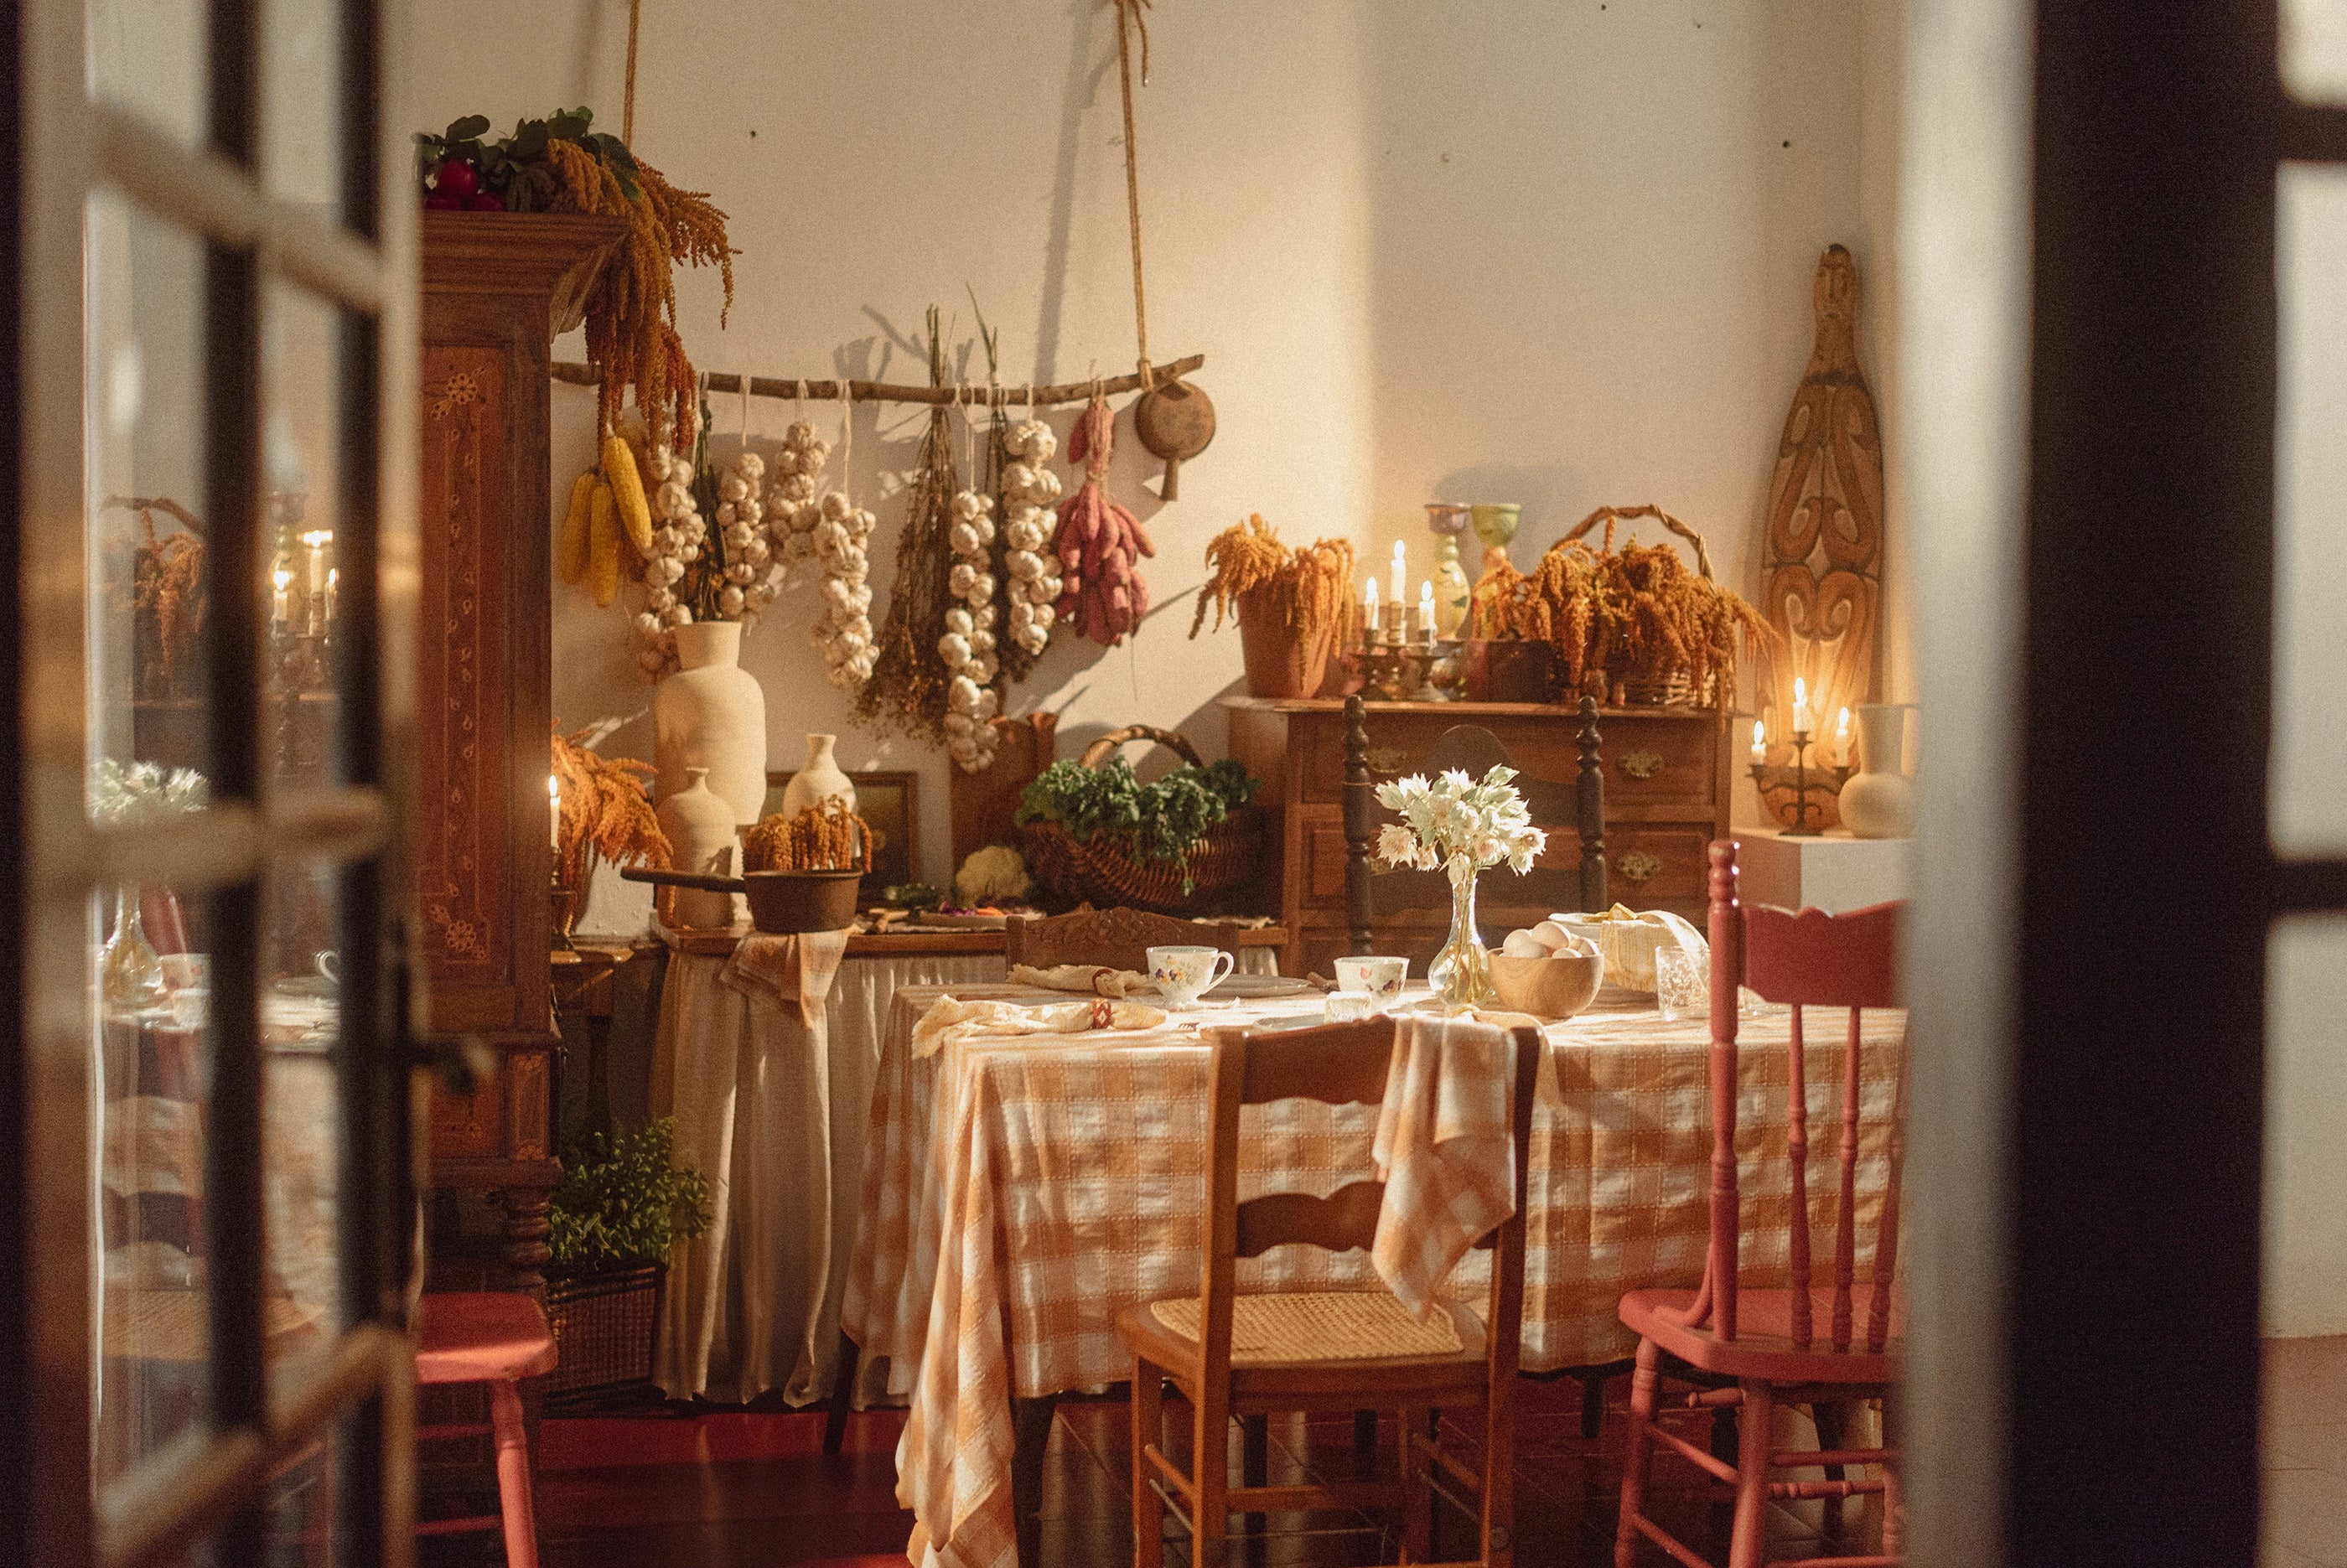 Vintage kitchen ambiance featuring dried flowers adorning the walls, complemented by a dining table adorned with a pink checkerboard tablecloth.	